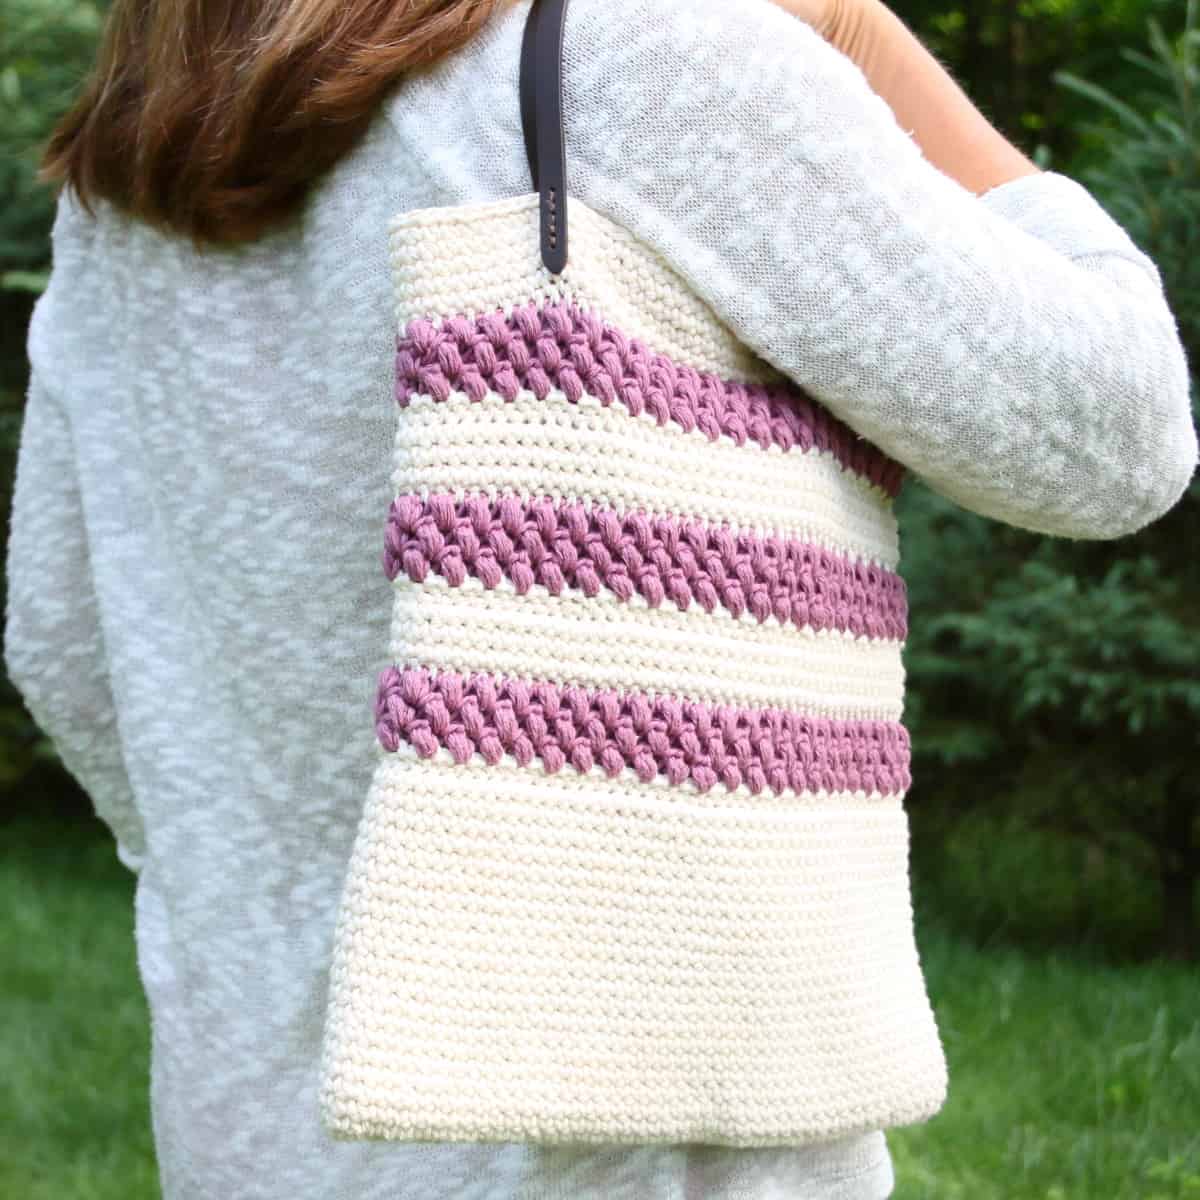 Free Crochet Bag Pattern. Tote Around Your Summer Books and Gadgets.